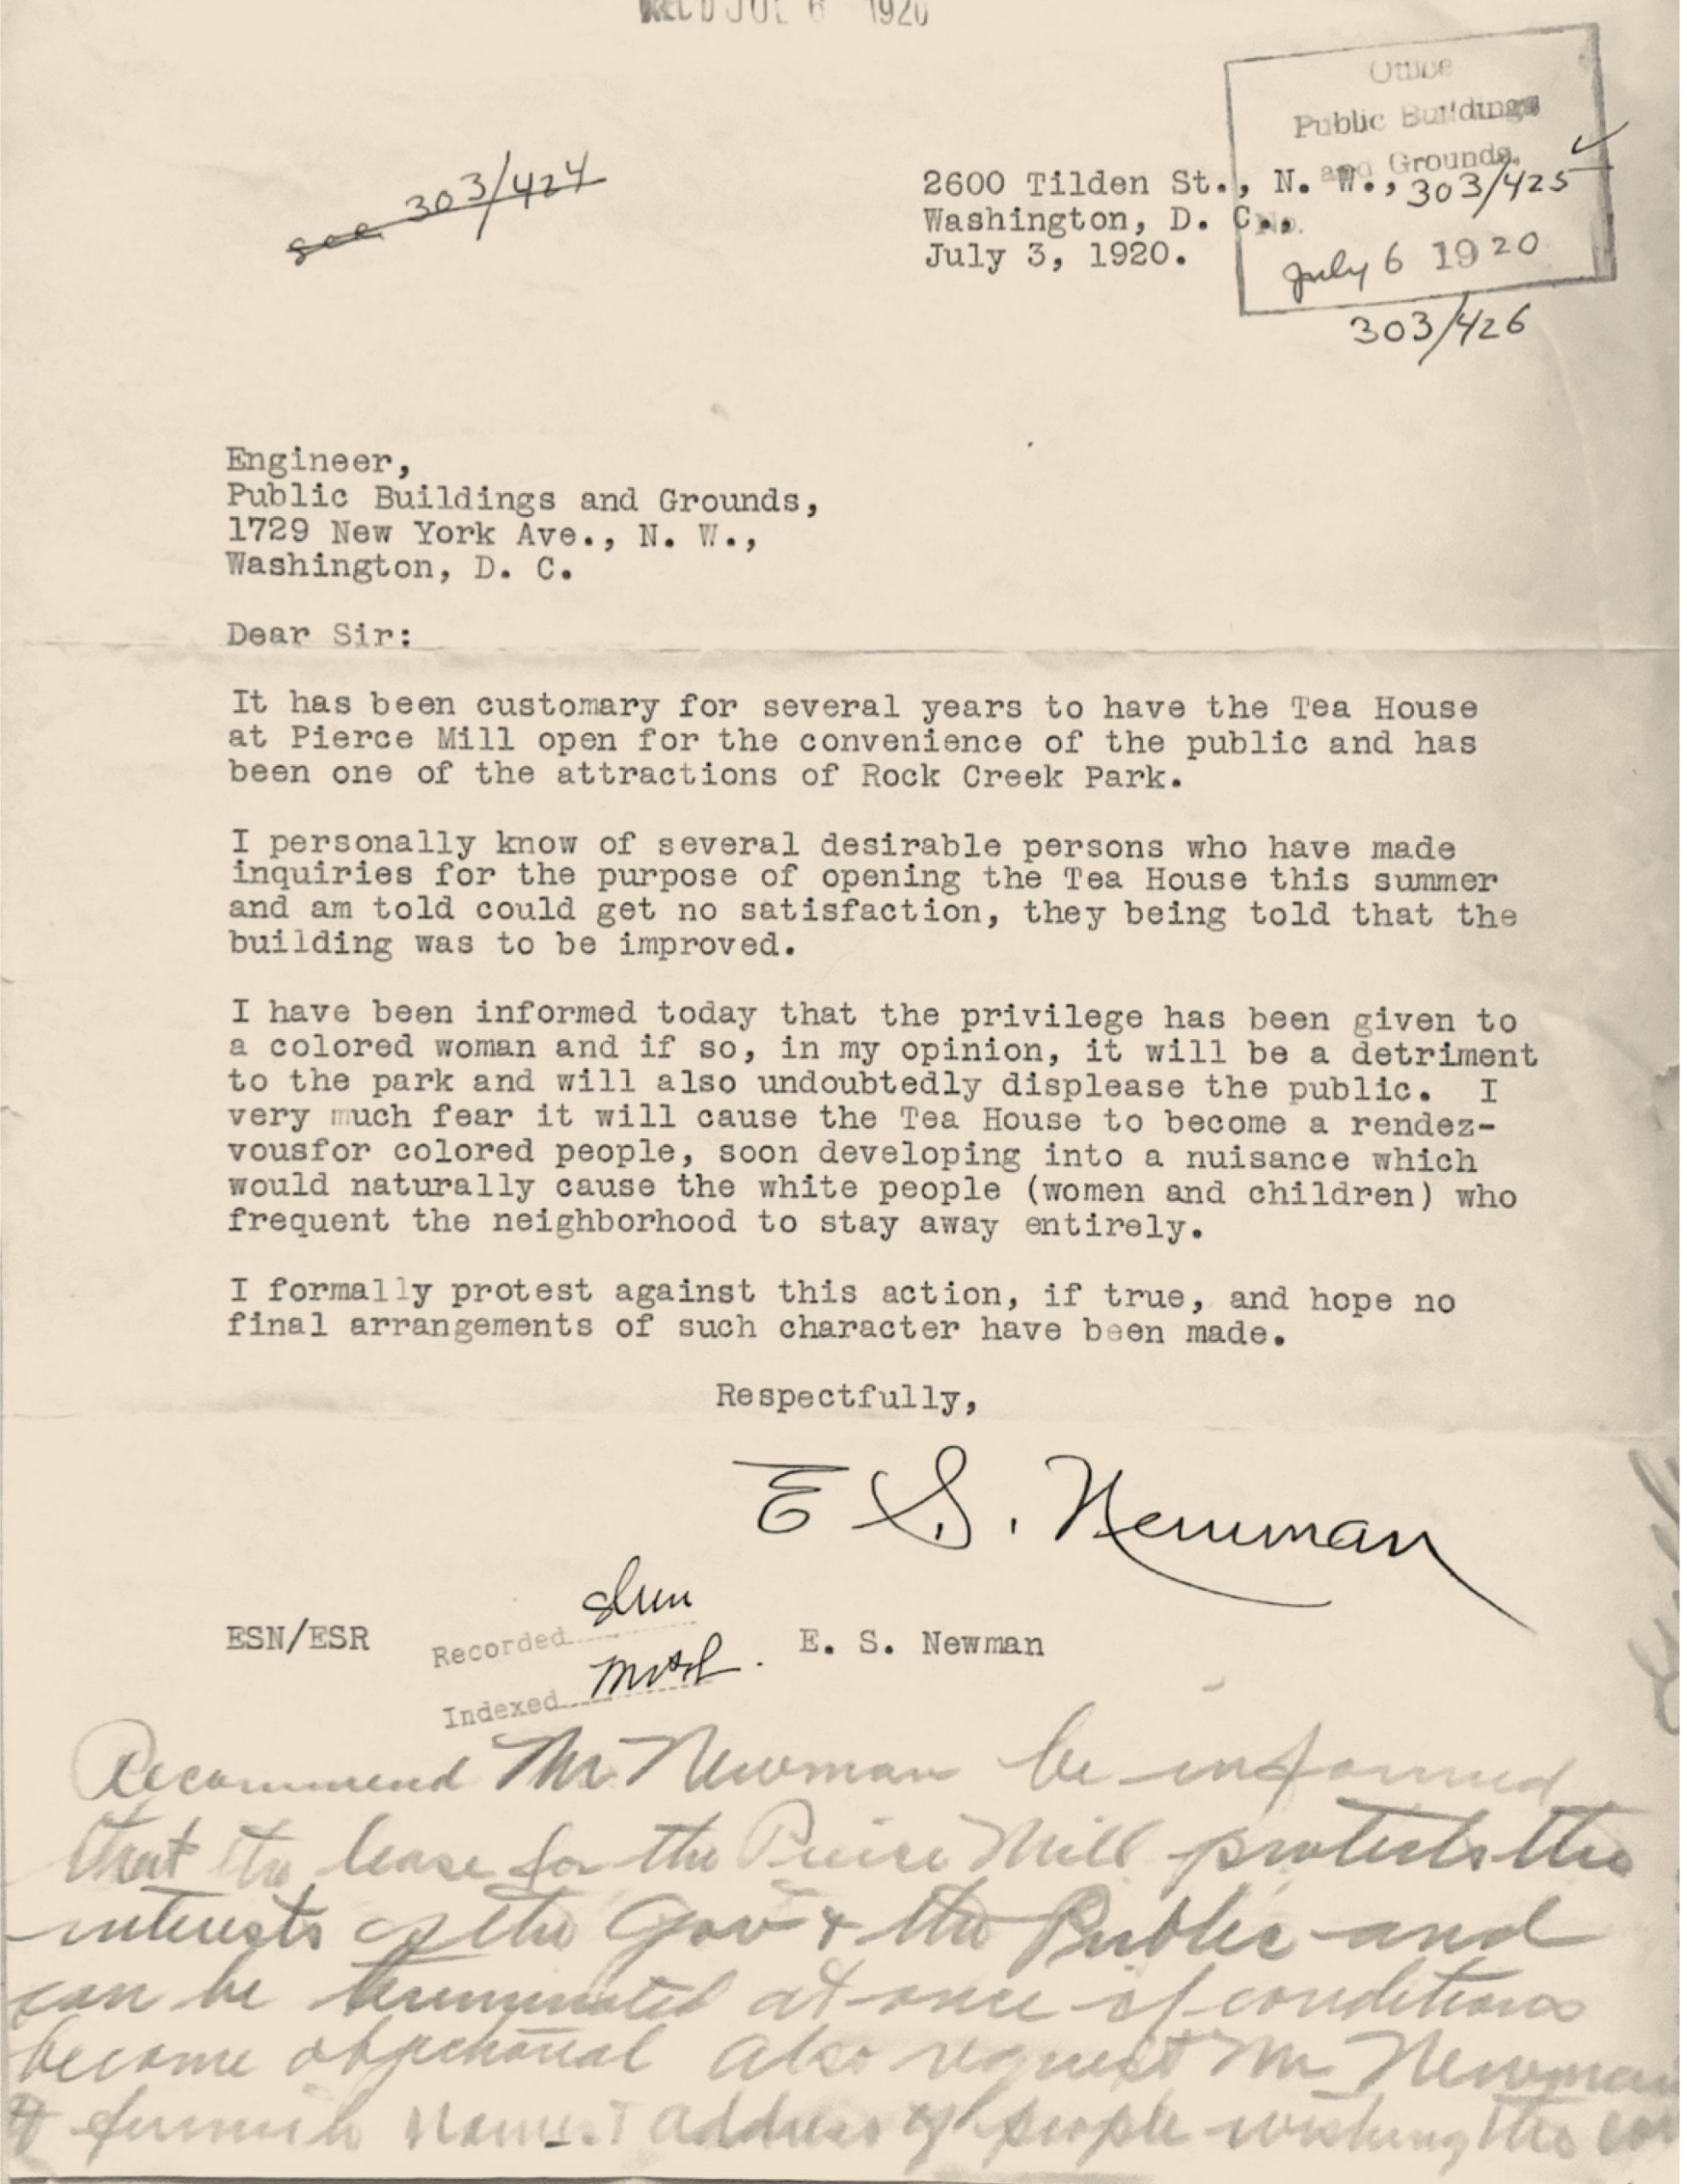 Typewritten letter from E. S. Newman to Office of Public Buildings and Grounds